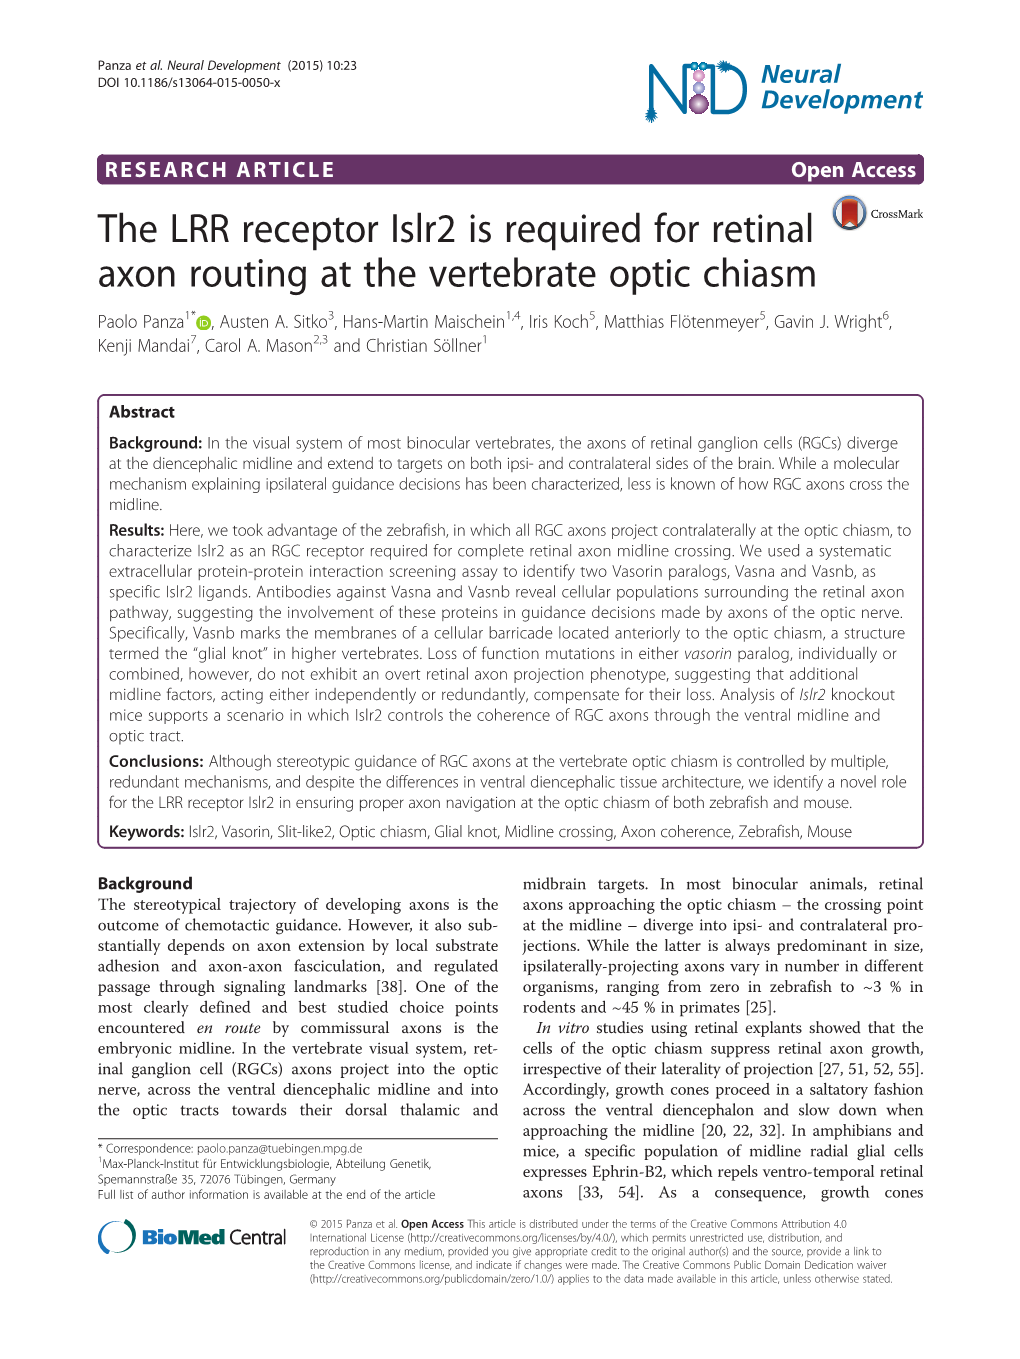 The LRR Receptor Islr2 Is Required for Retinal Axon Routing at the Vertebrate Optic Chiasm Paolo Panza1* , Austen A